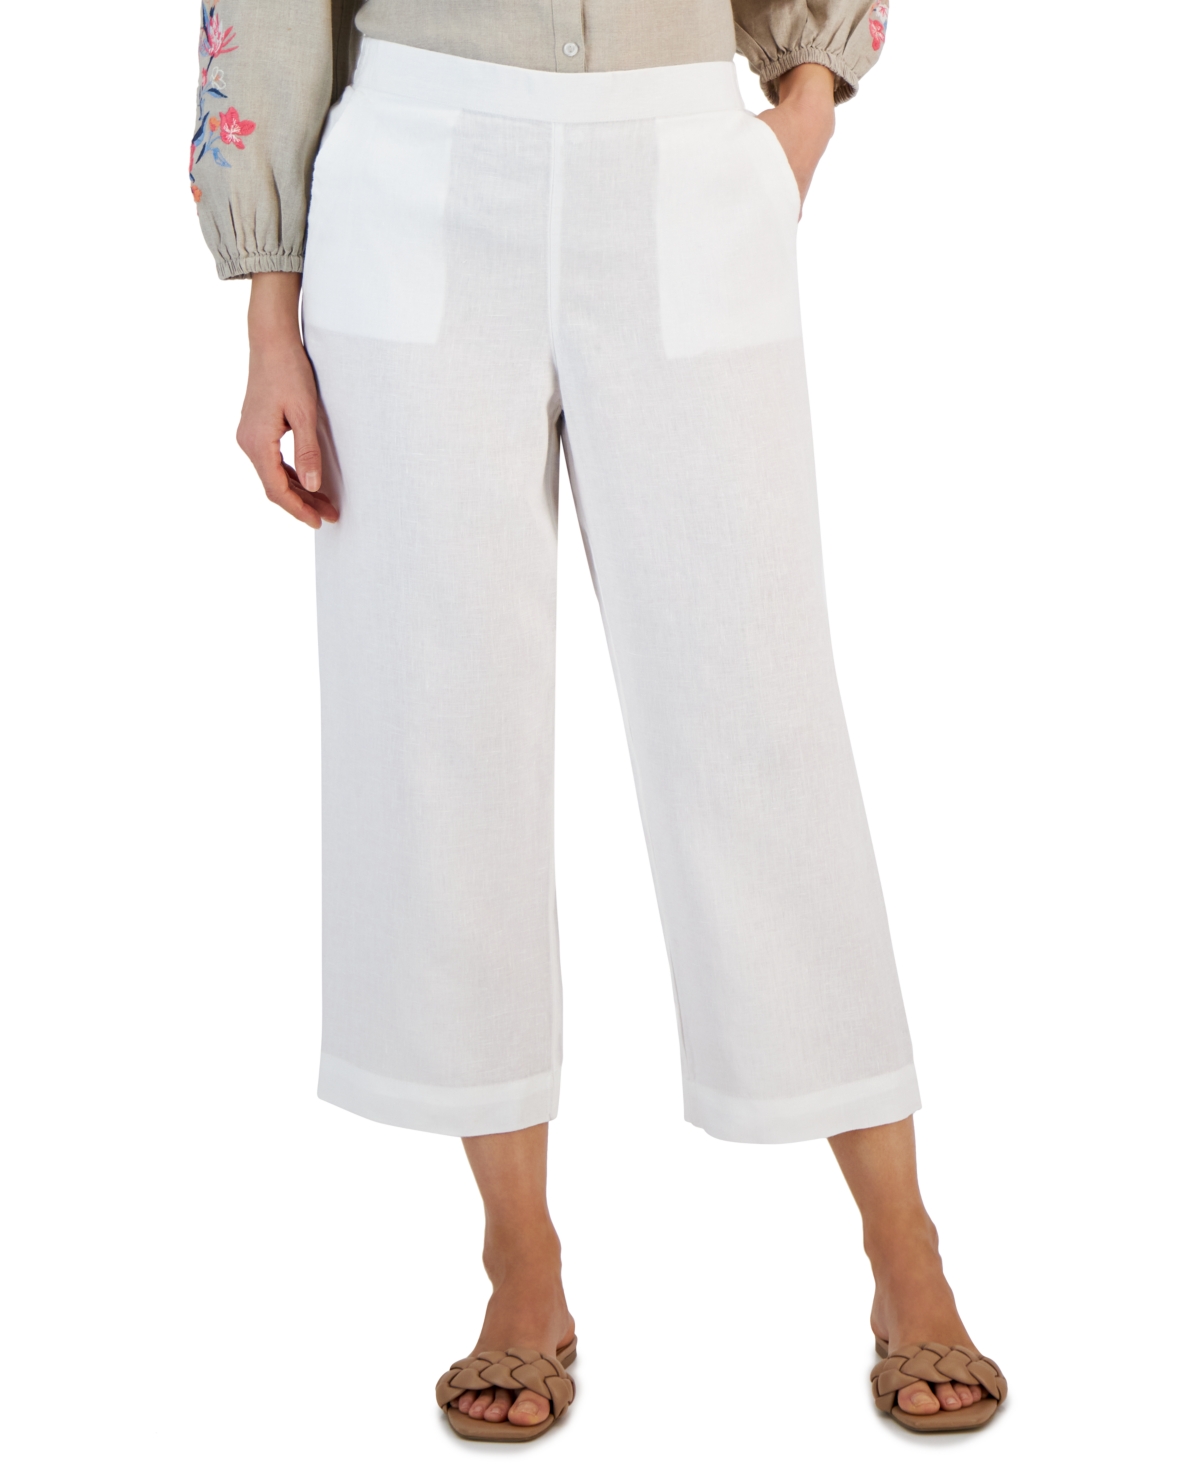 Women's 100% Linen Pull-On Cropped Pants, Created for Macy's - Bright White